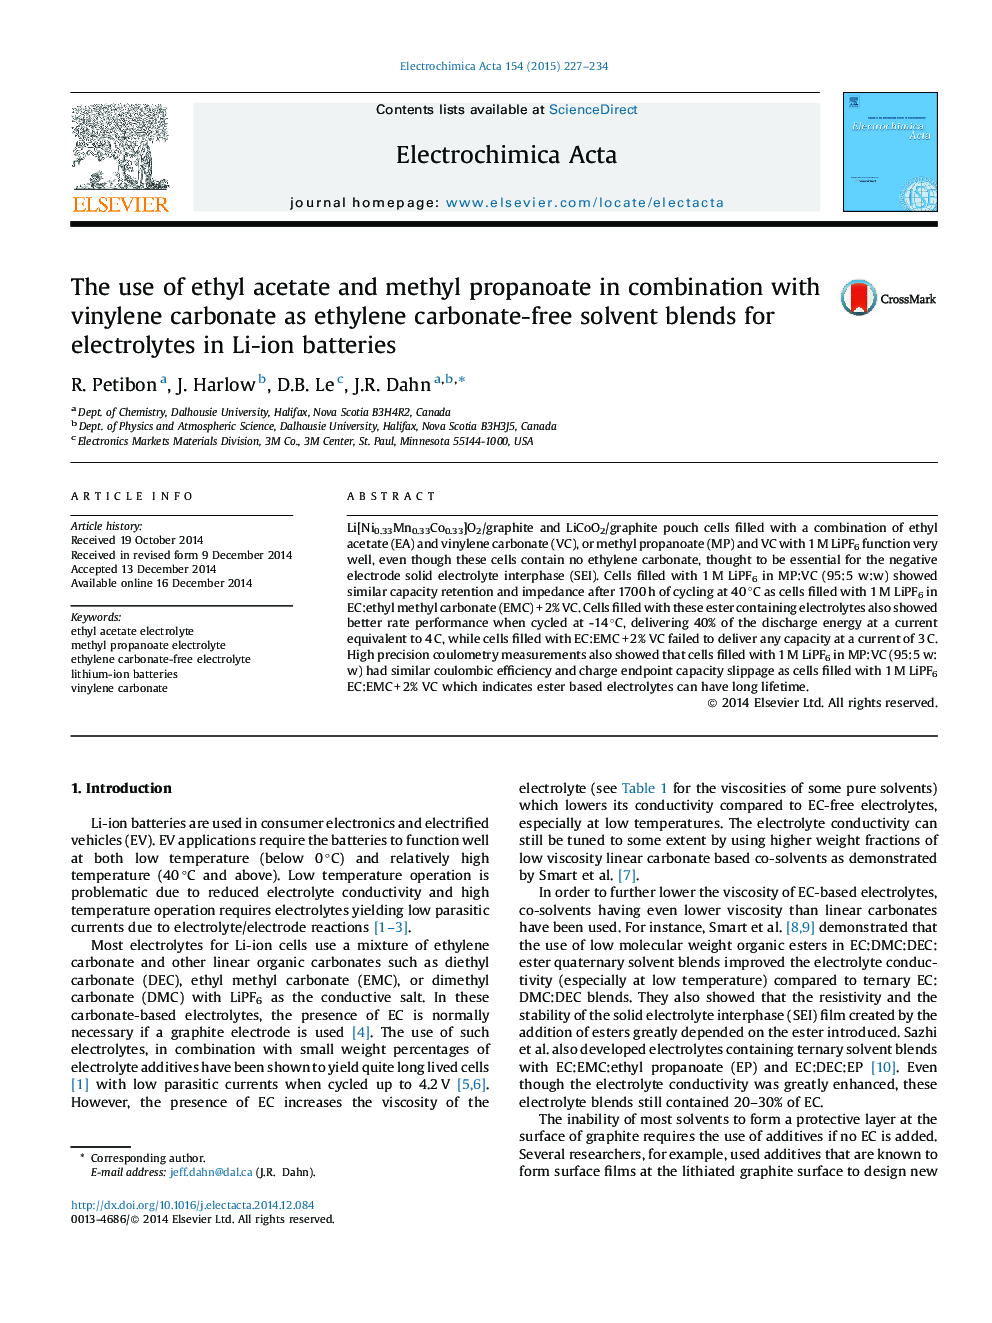 The use of ethyl acetate and methyl propanoate in combination with vinylene carbonate as ethylene carbonate-free solvent blends for electrolytes in Li-ion batteries